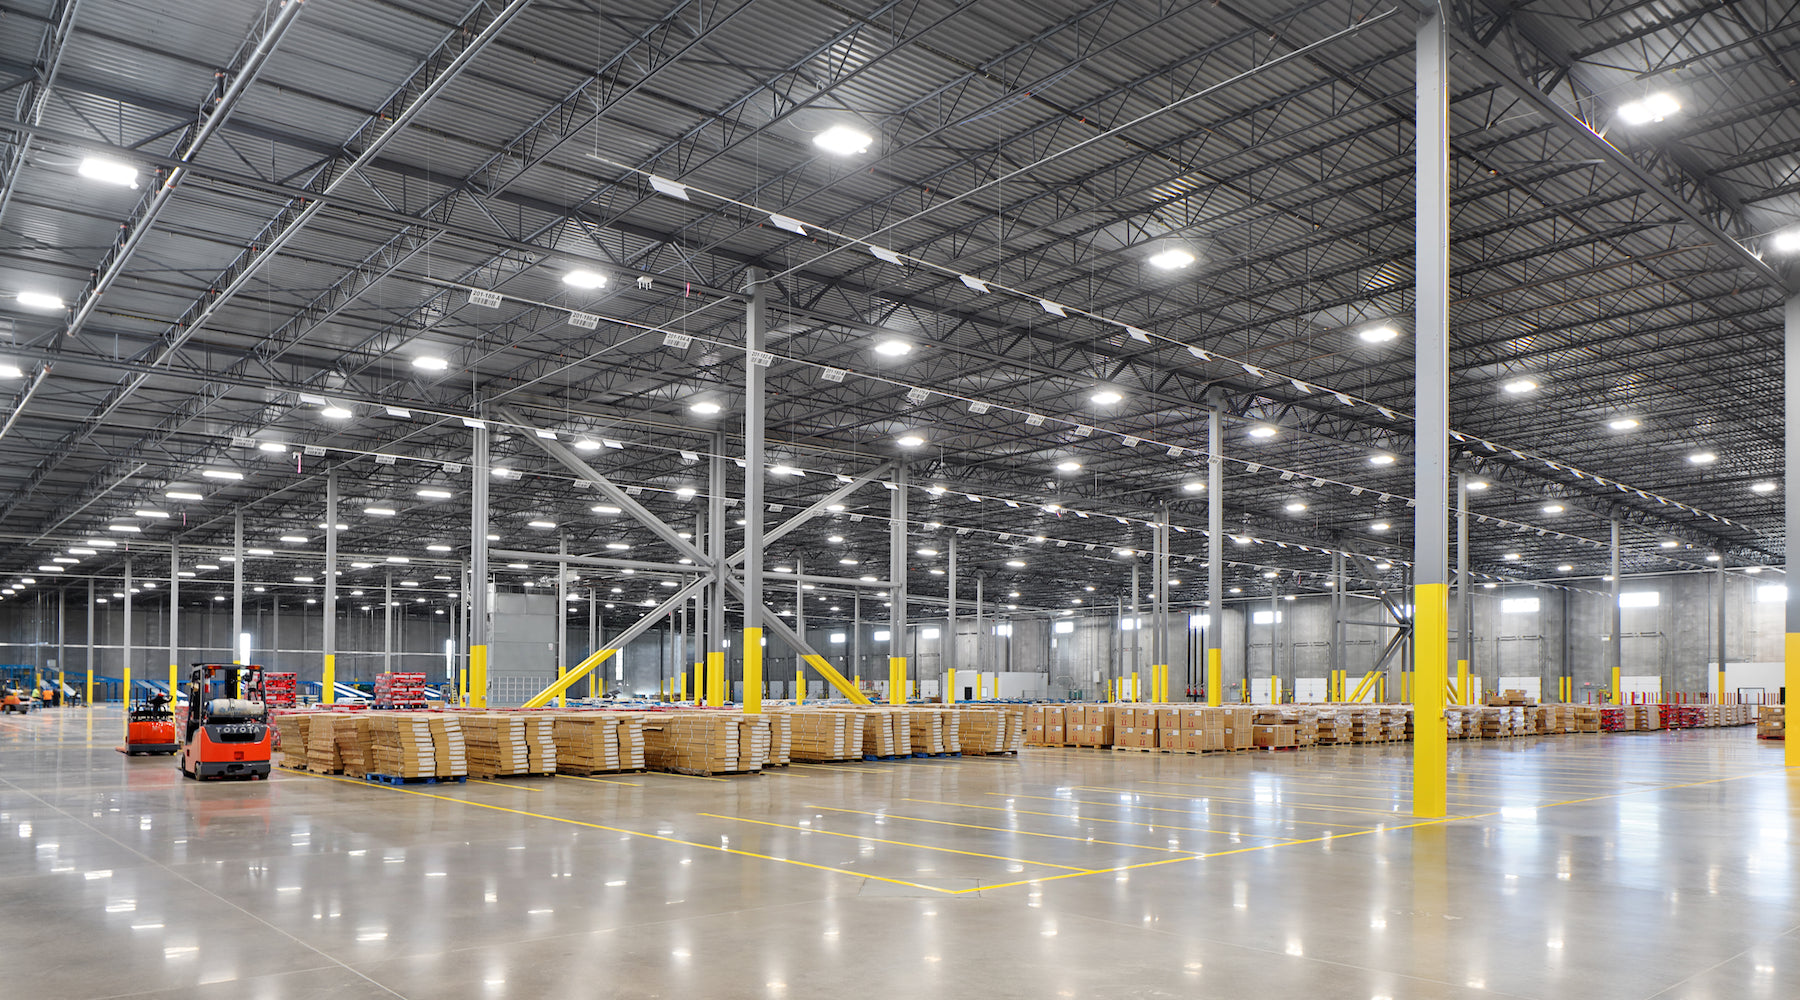 Factory lighting installed in large warehouse with parked forklifts, shipping containers, and crates